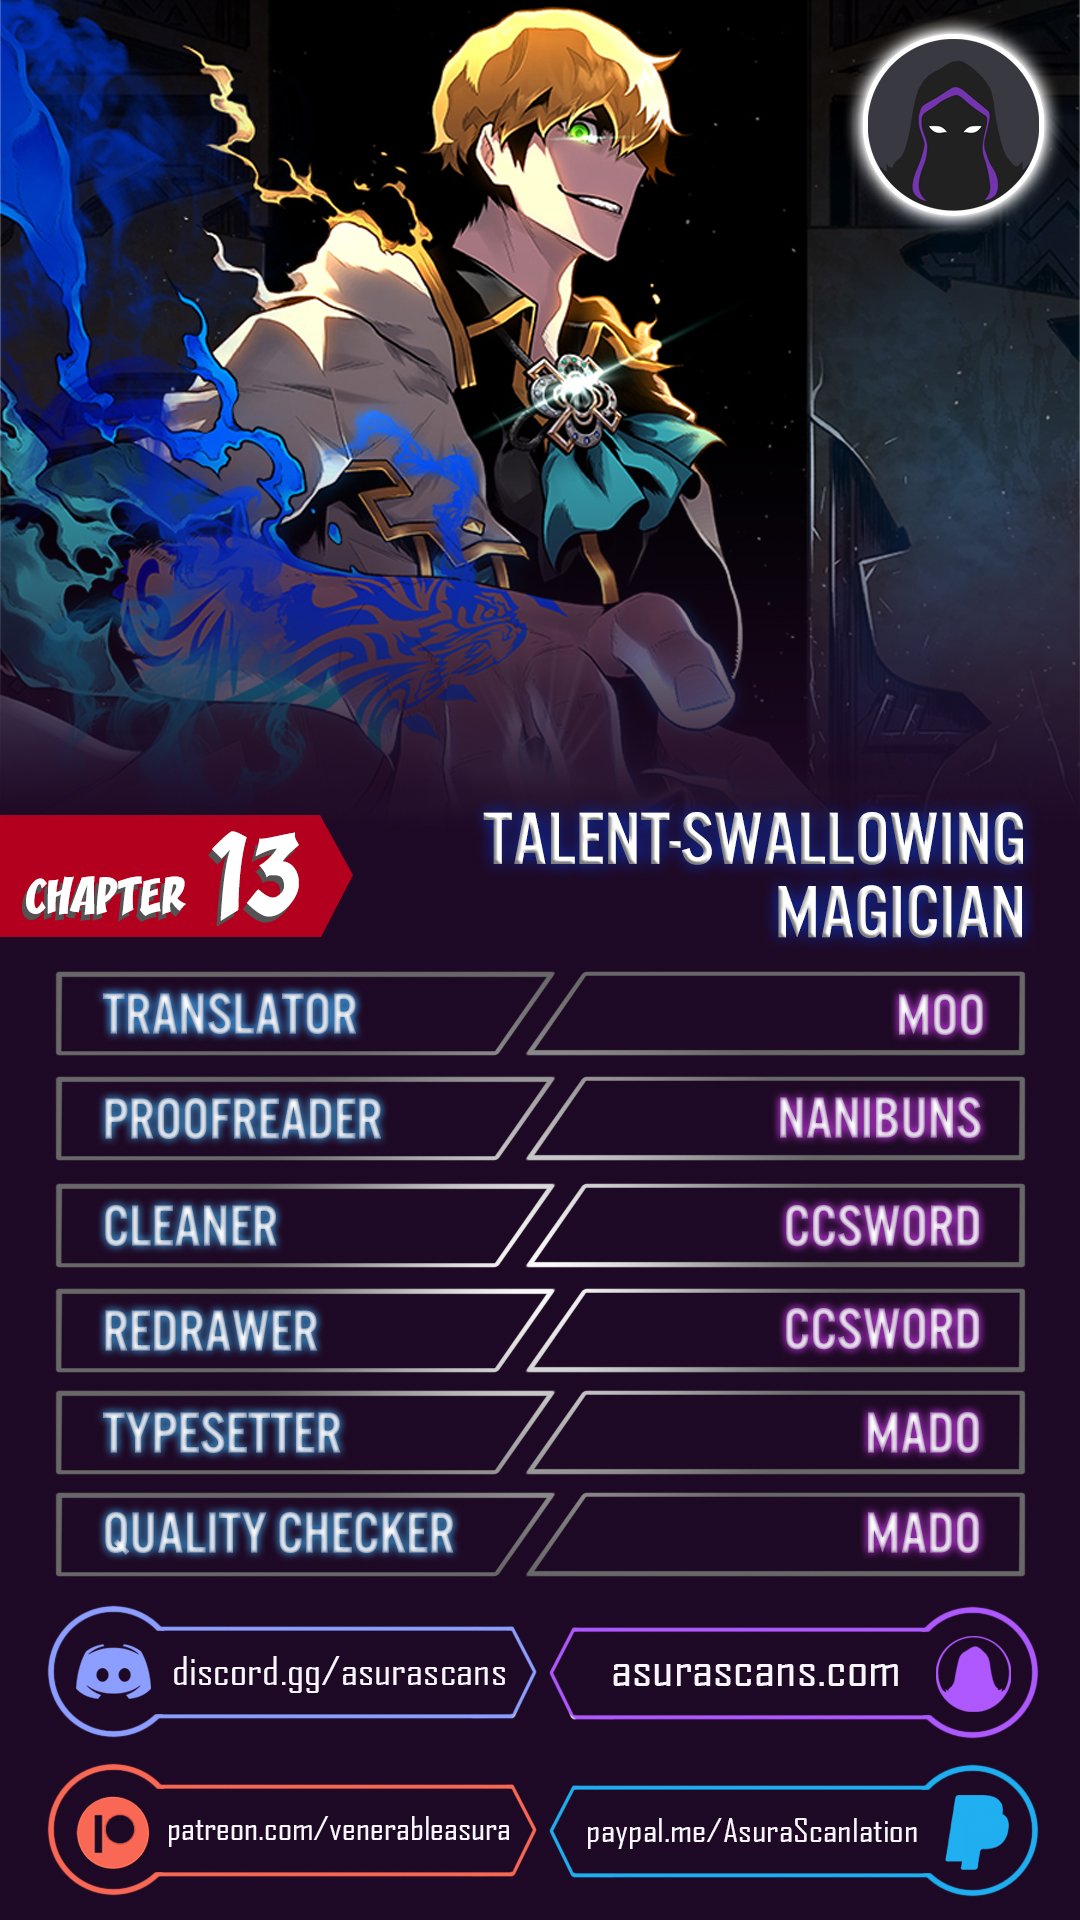 Talent-Swallowing Magician - Chapter 15411 - Image 1